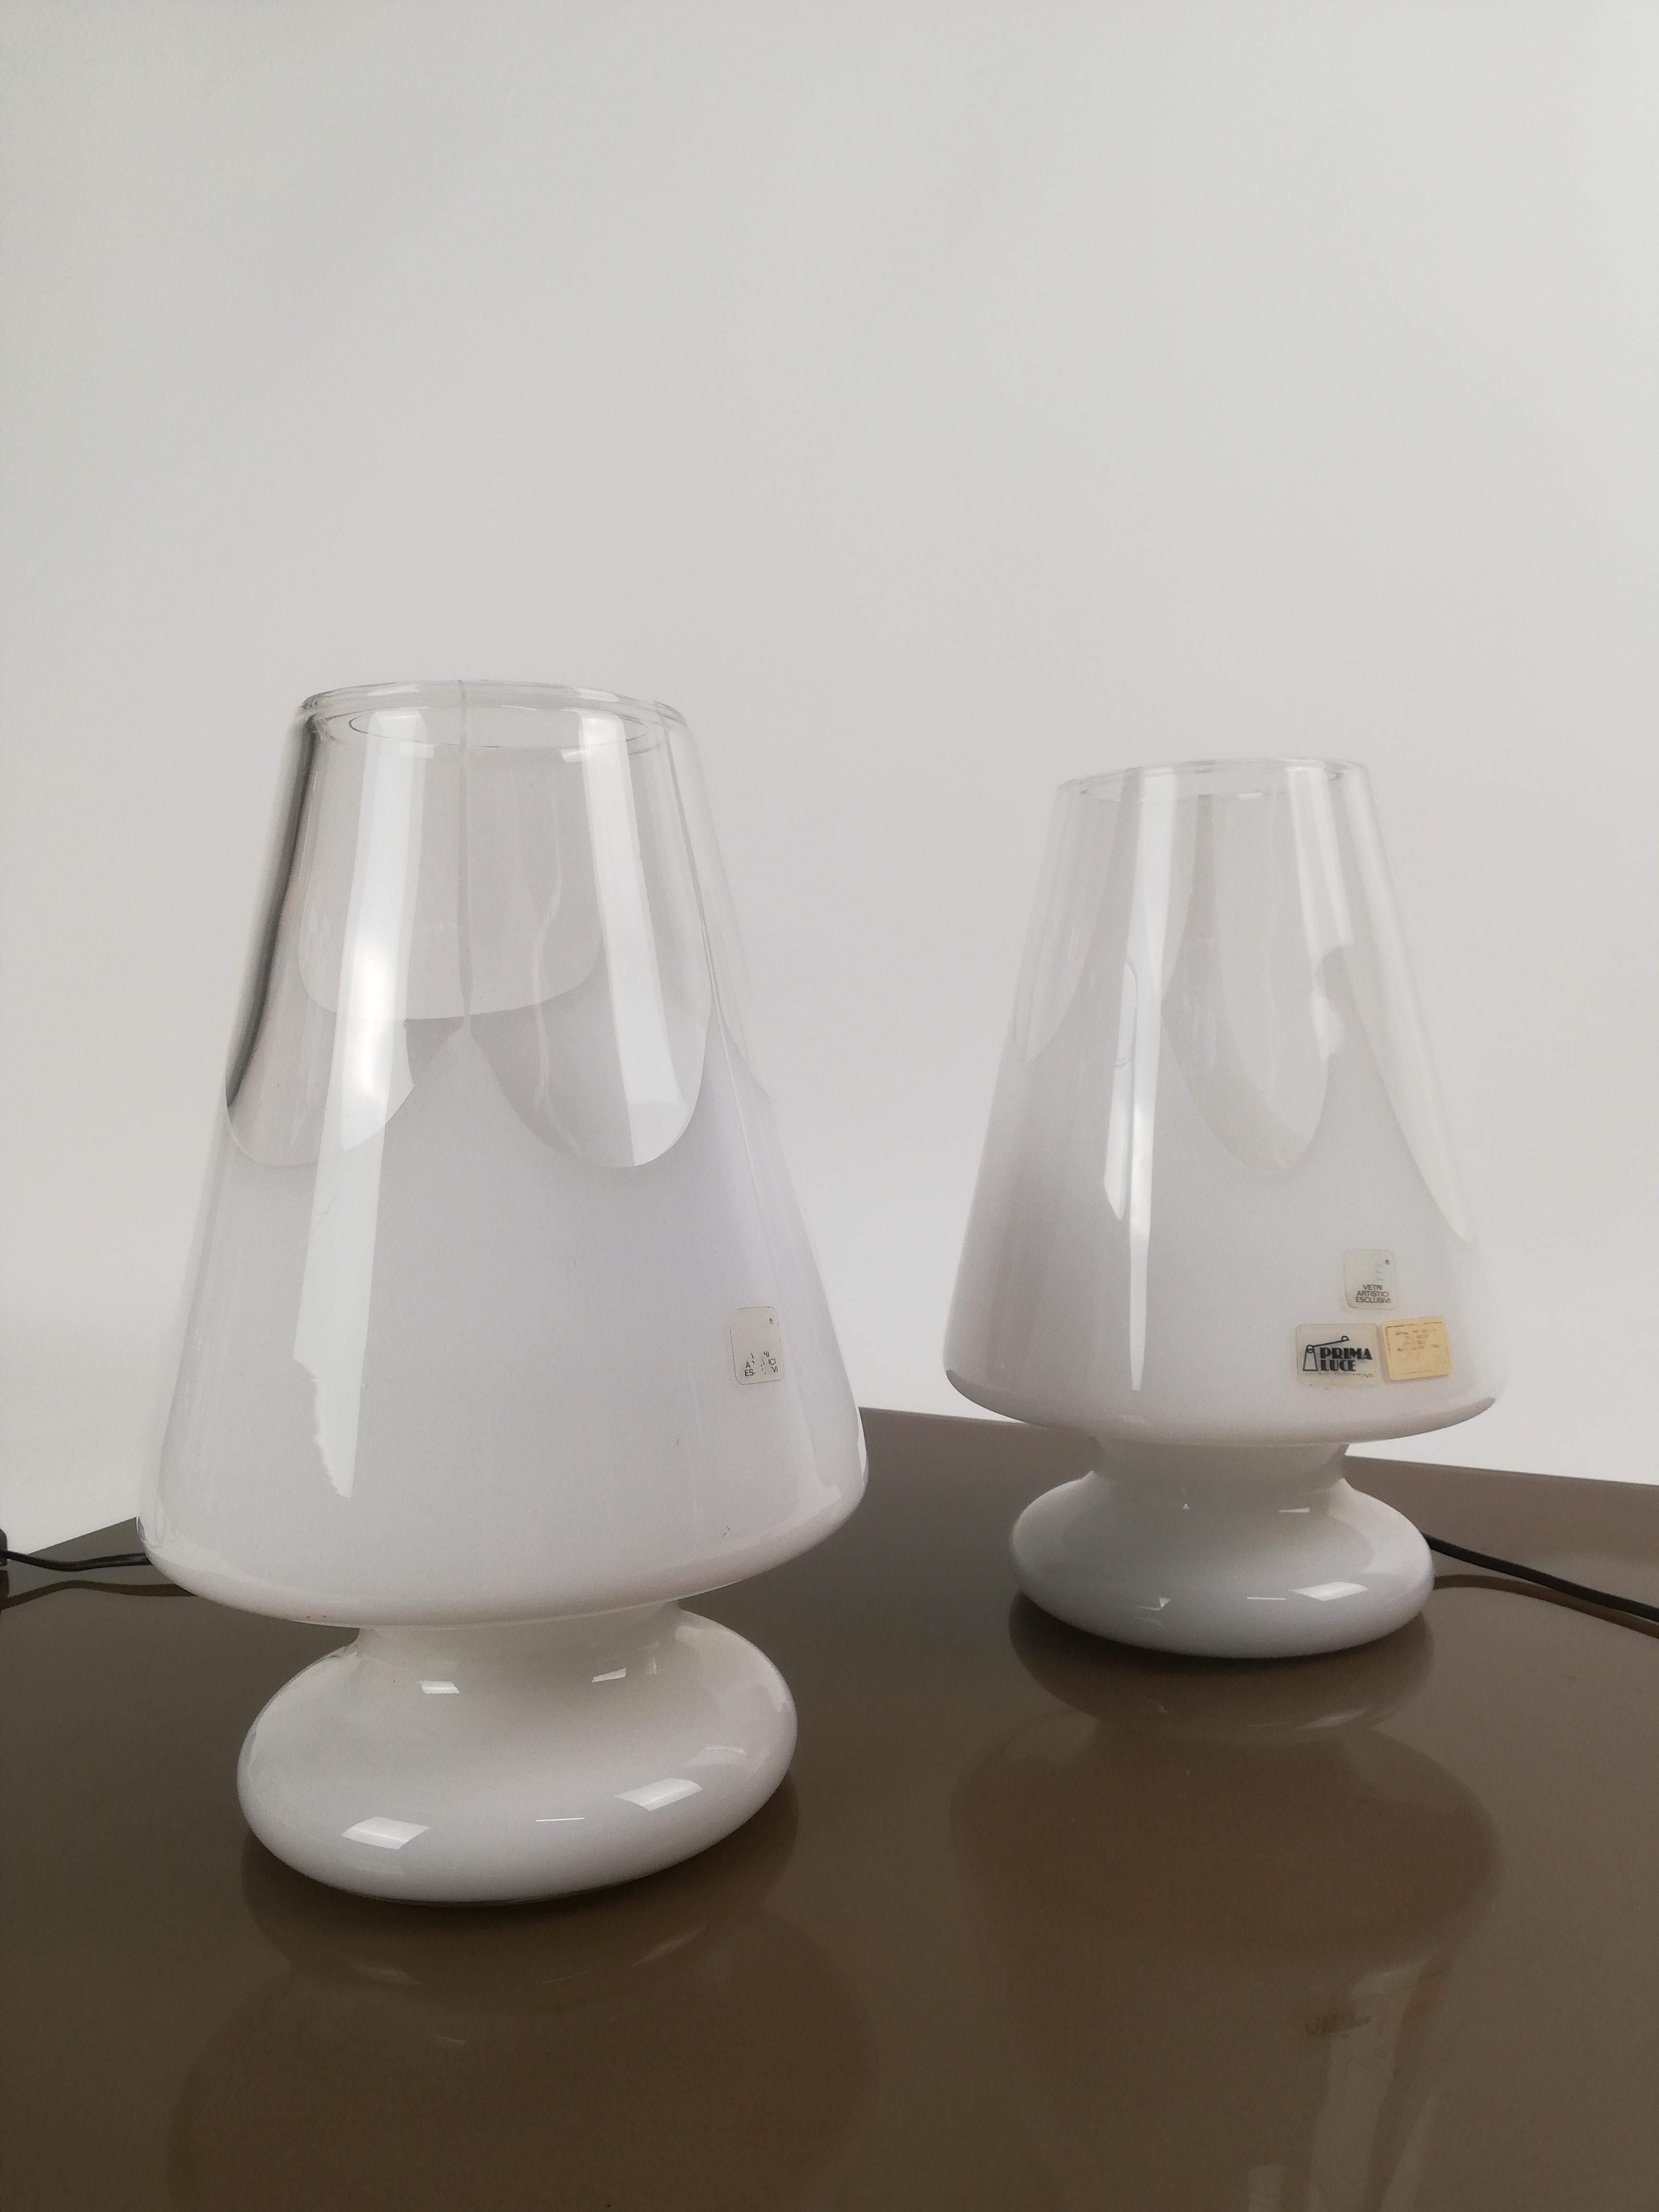 Italian Pair of Table Lamps by Prima Luce in White Artistic Murano Glass, Italy, 1970s For Sale